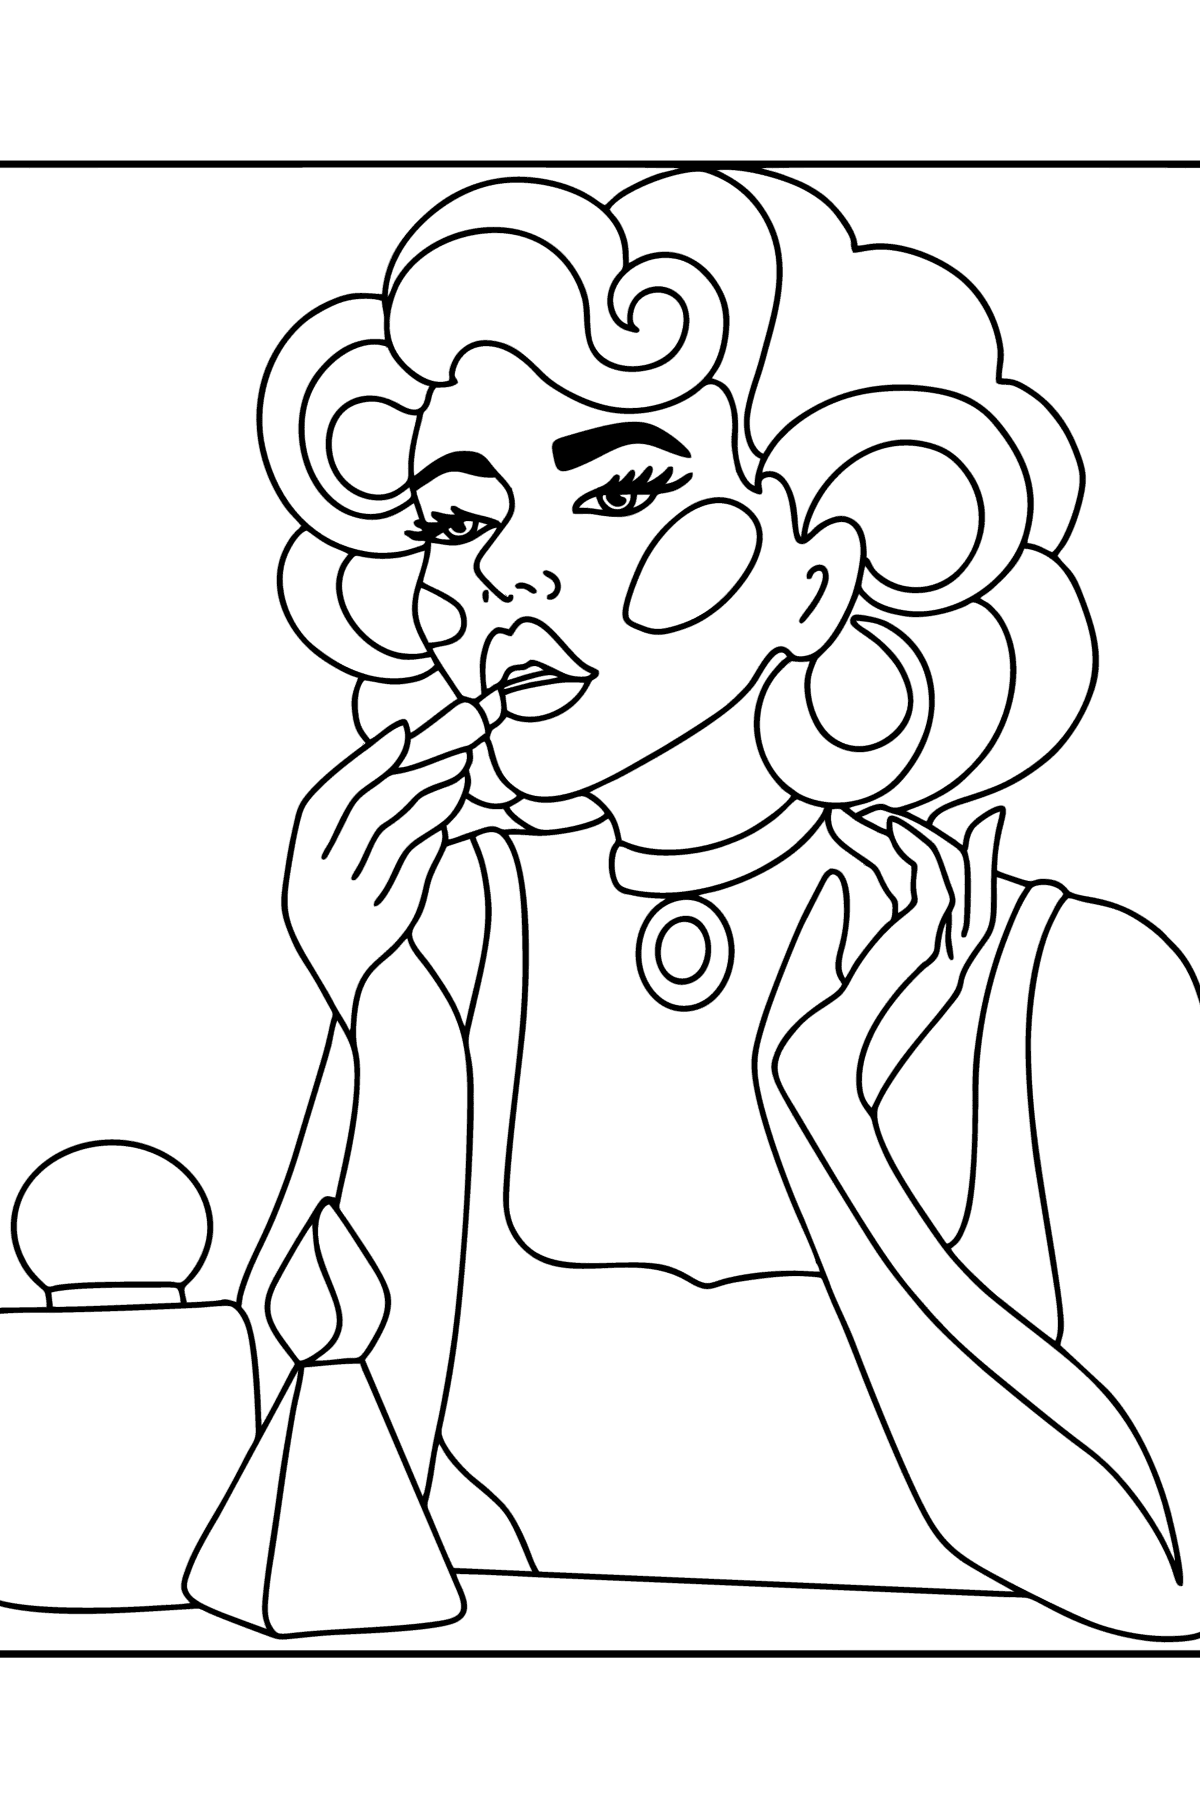 Girl actress сoloring page - Coloring Pages for Kids